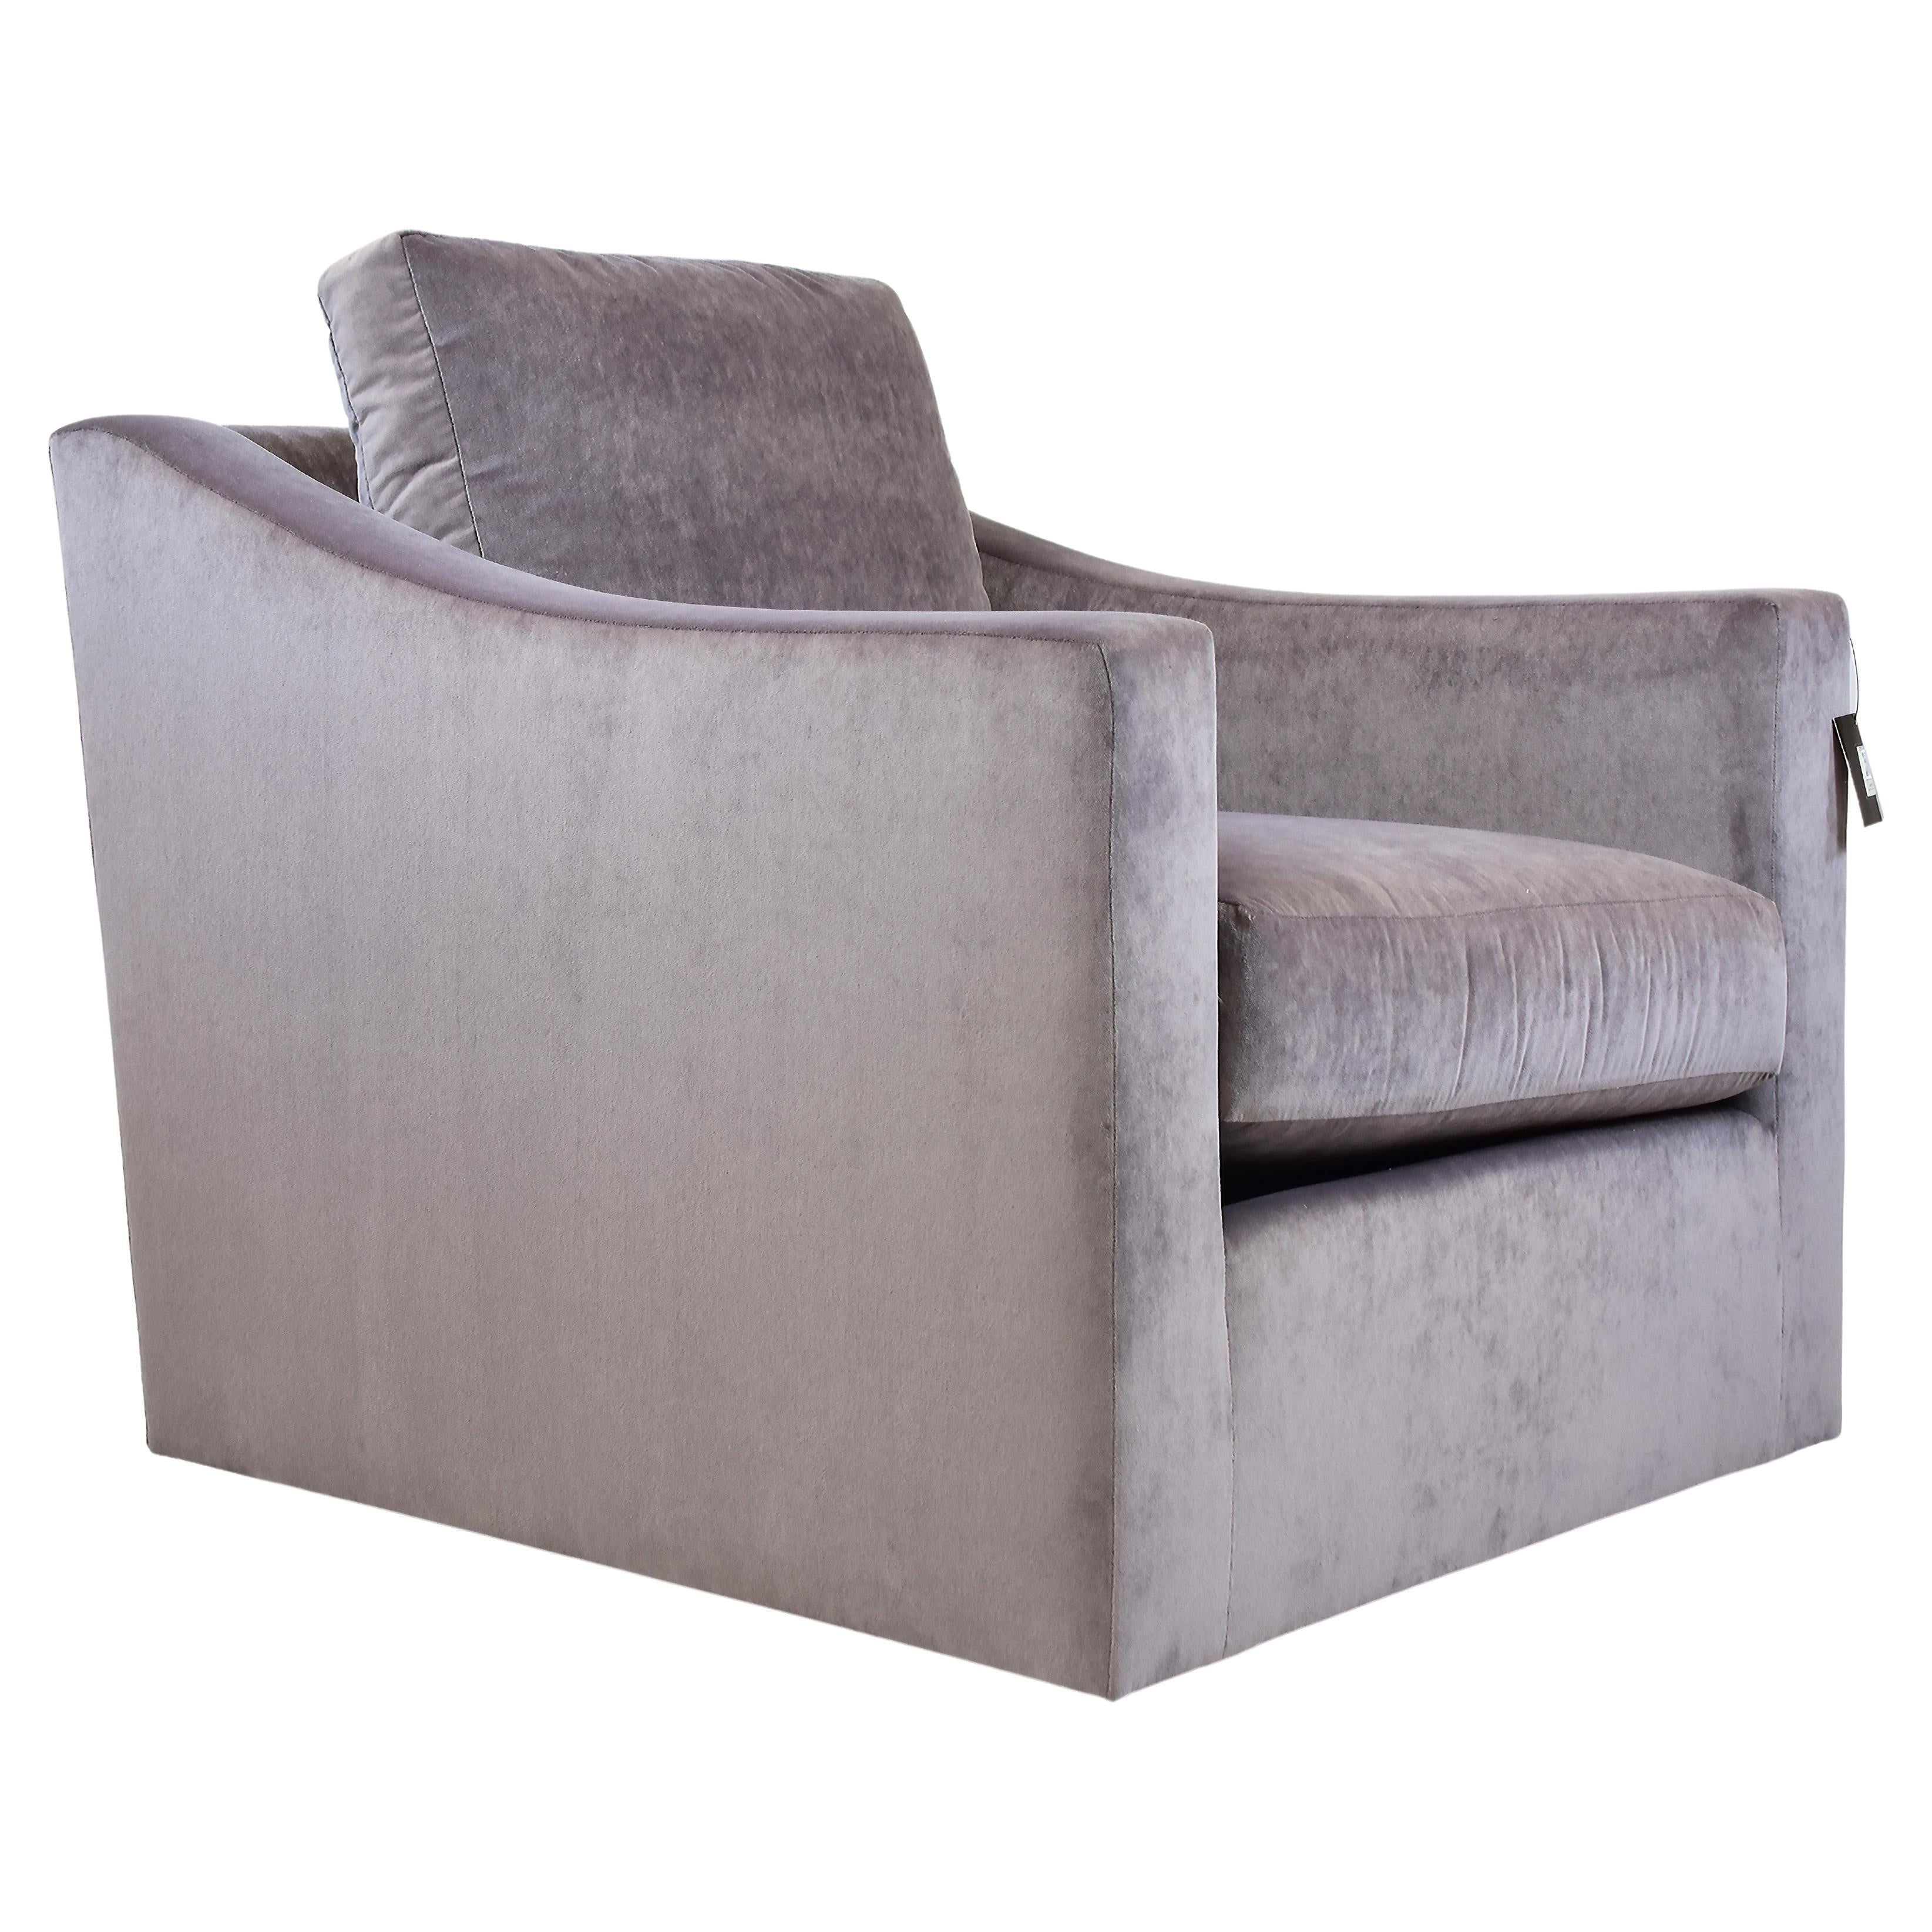 Le Jeune Upholstery Lacey Swivel Lounge Chair Showroom Model For Sale